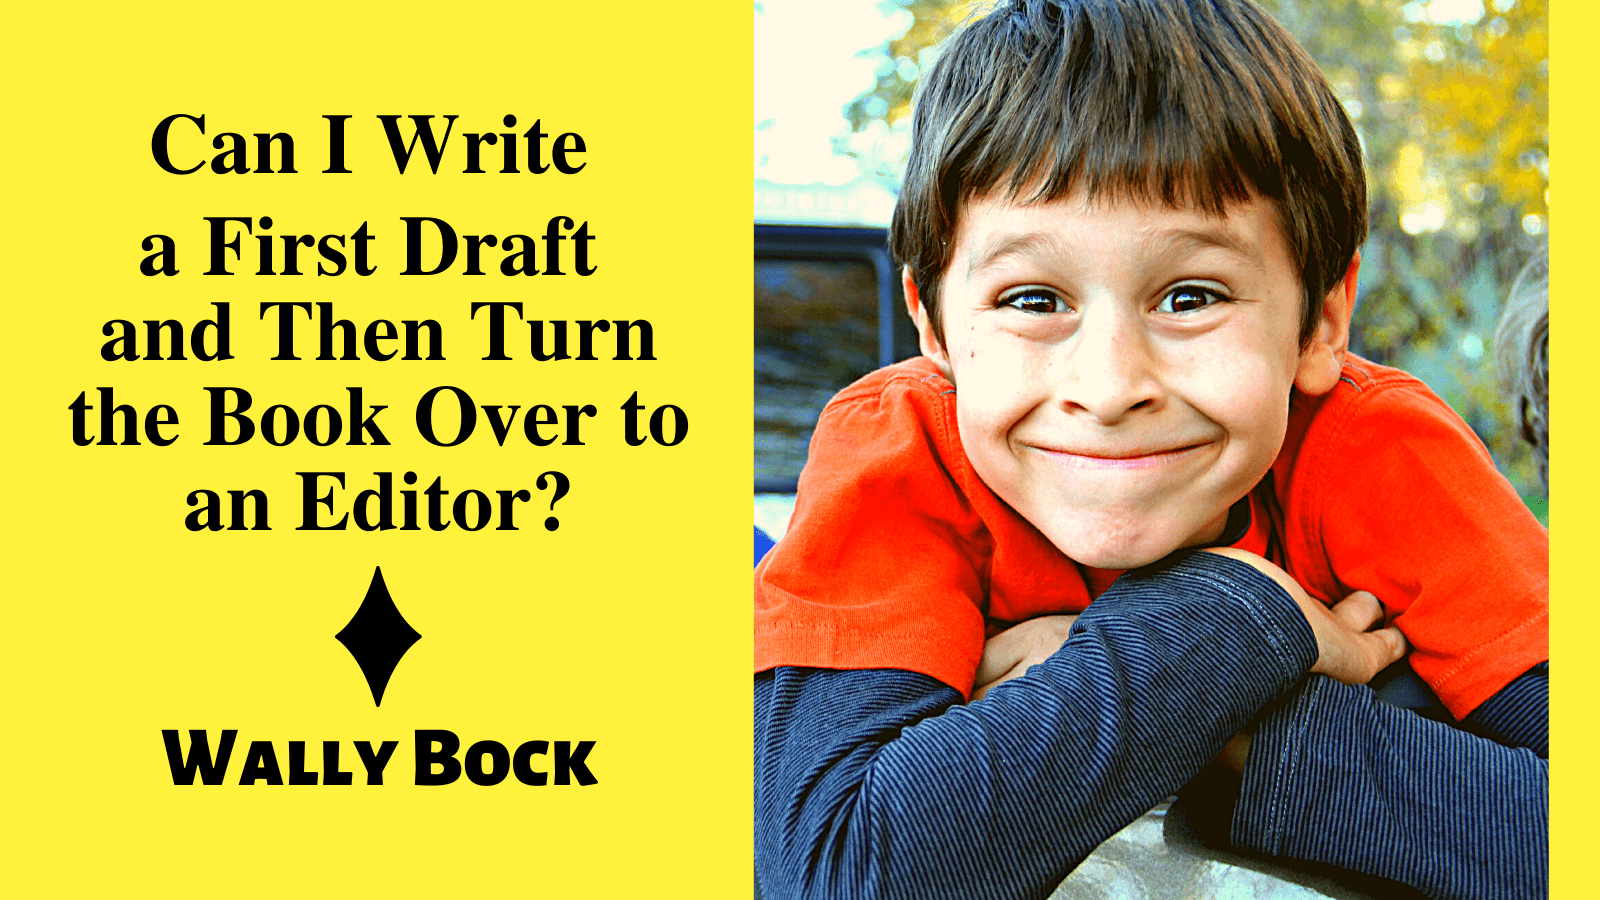 Can I write the first draft and then turn my book over to an editor?